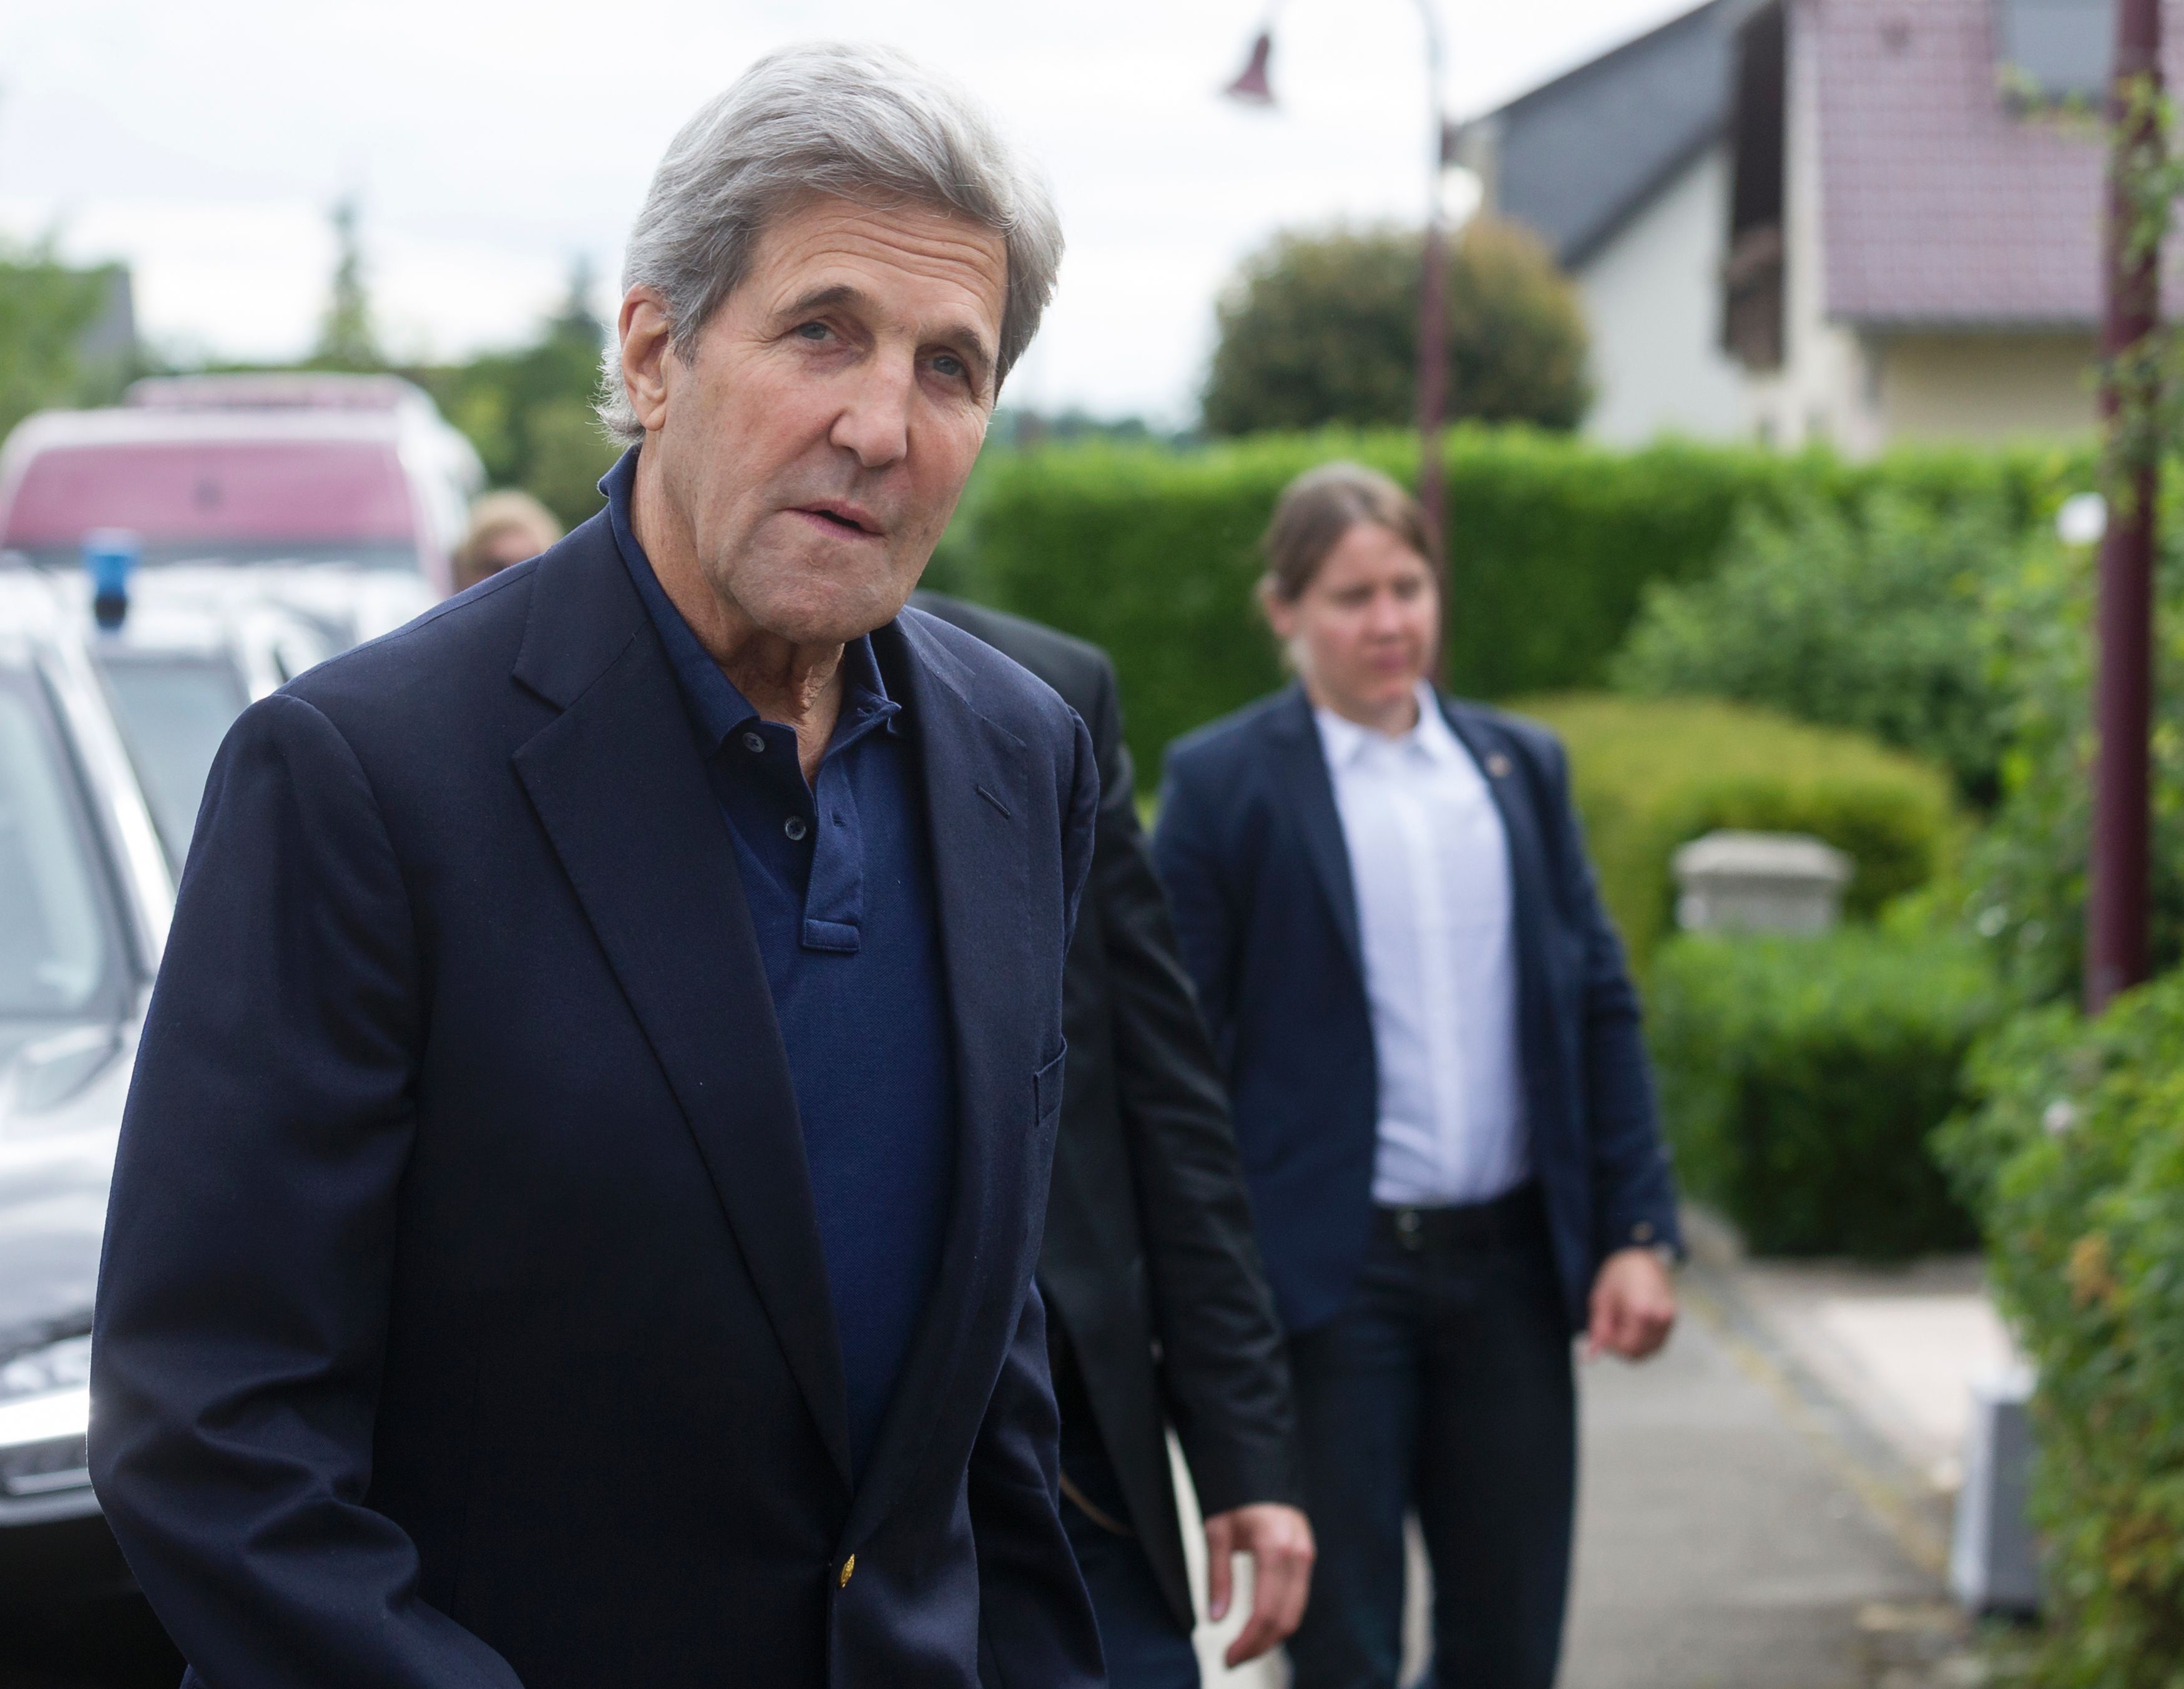 Turkey must send evidence not allegations in extradition request, says Kerry